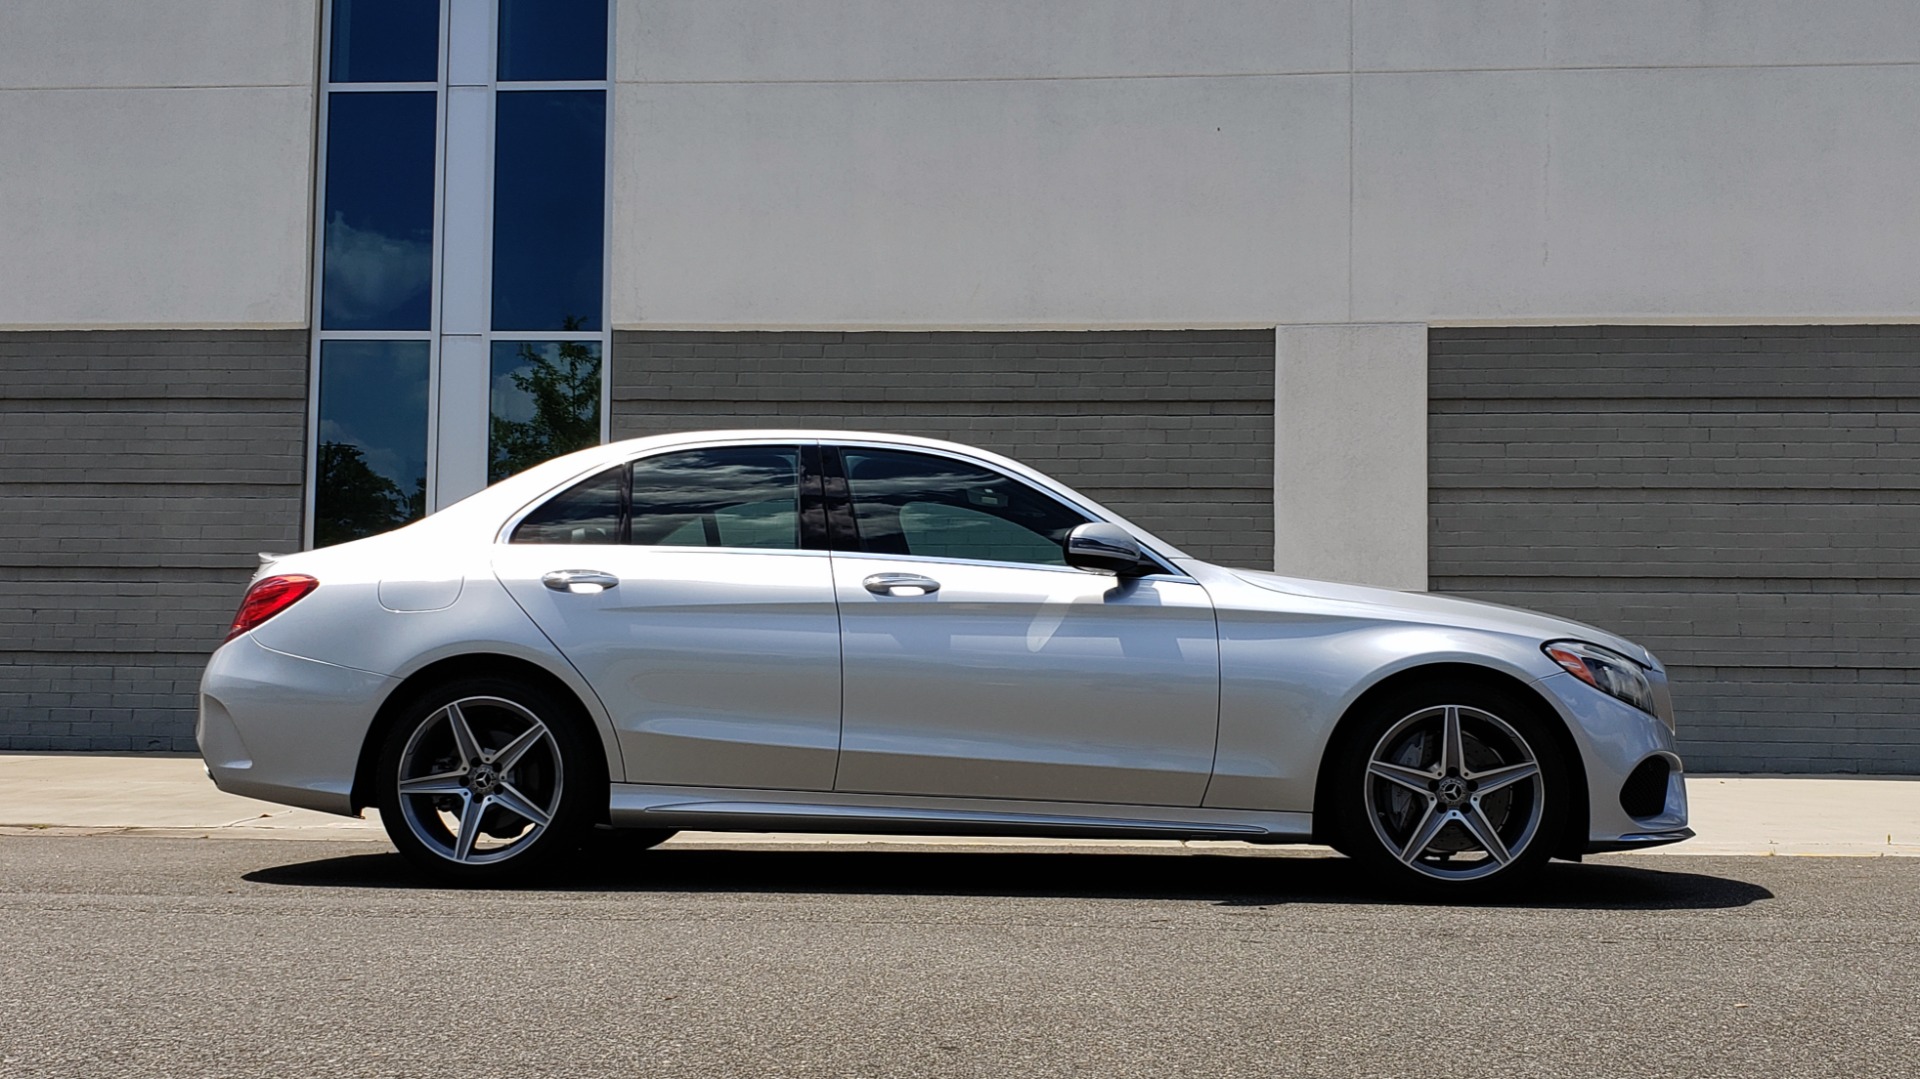 Used 2018 Mercedes-Benz C-CLASS C 300 4MATIC / PREMIUM PKG / PANO-ROOF / AMG LINE / BURMESTER / REARVIEW for sale Sold at Formula Imports in Charlotte NC 28227 9